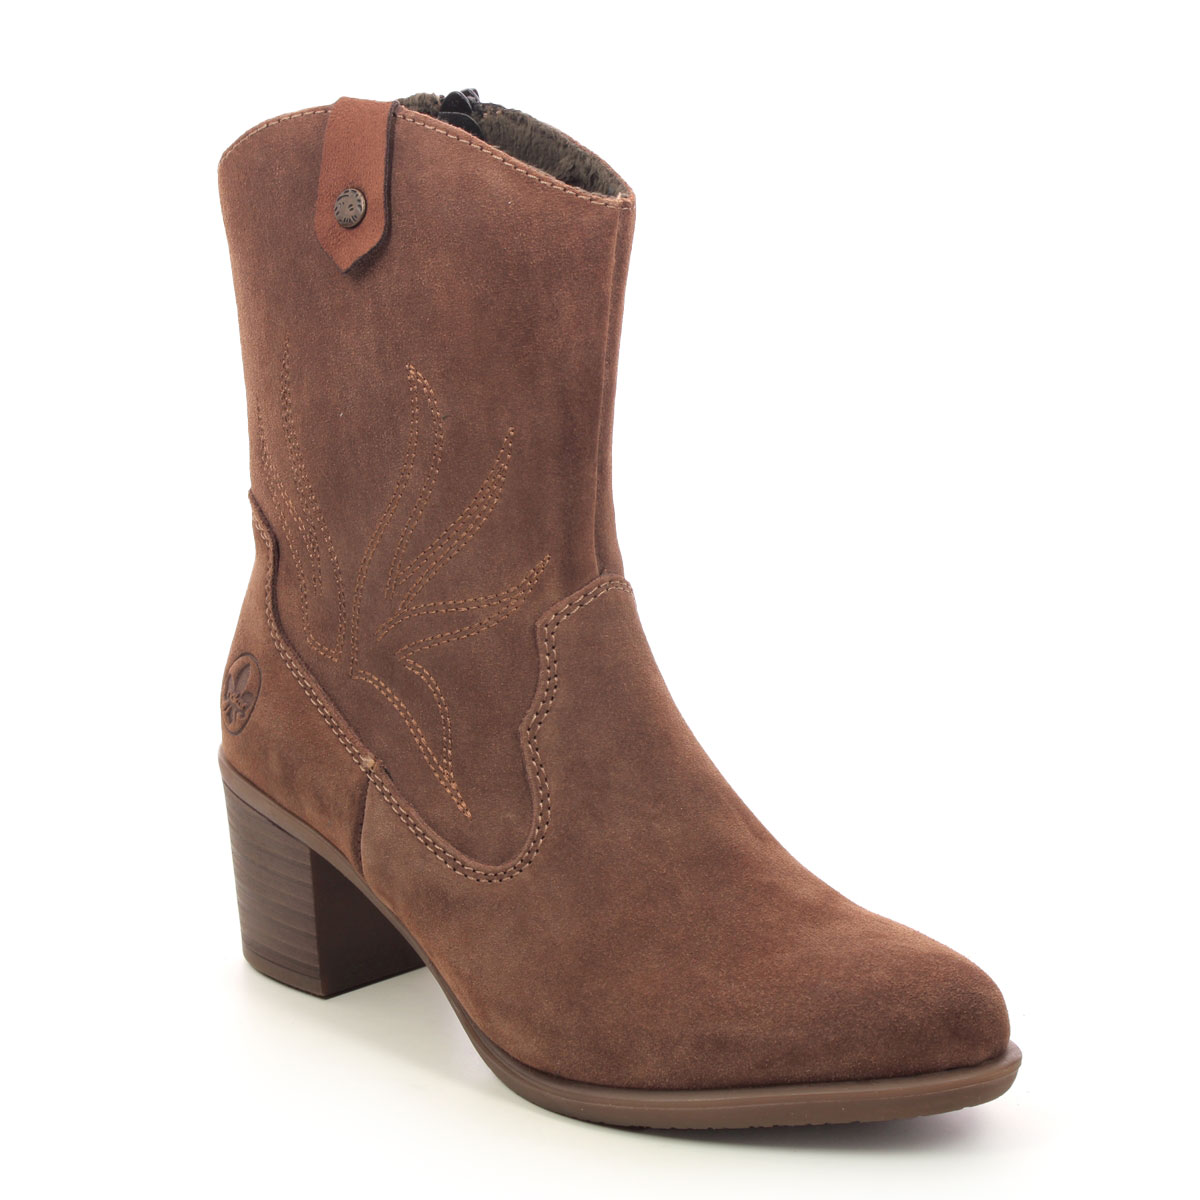 Rieker Saddle West Tan Suede Womens Ankle Boots Y2057-20 In Size 38 In Plain Tan Suede